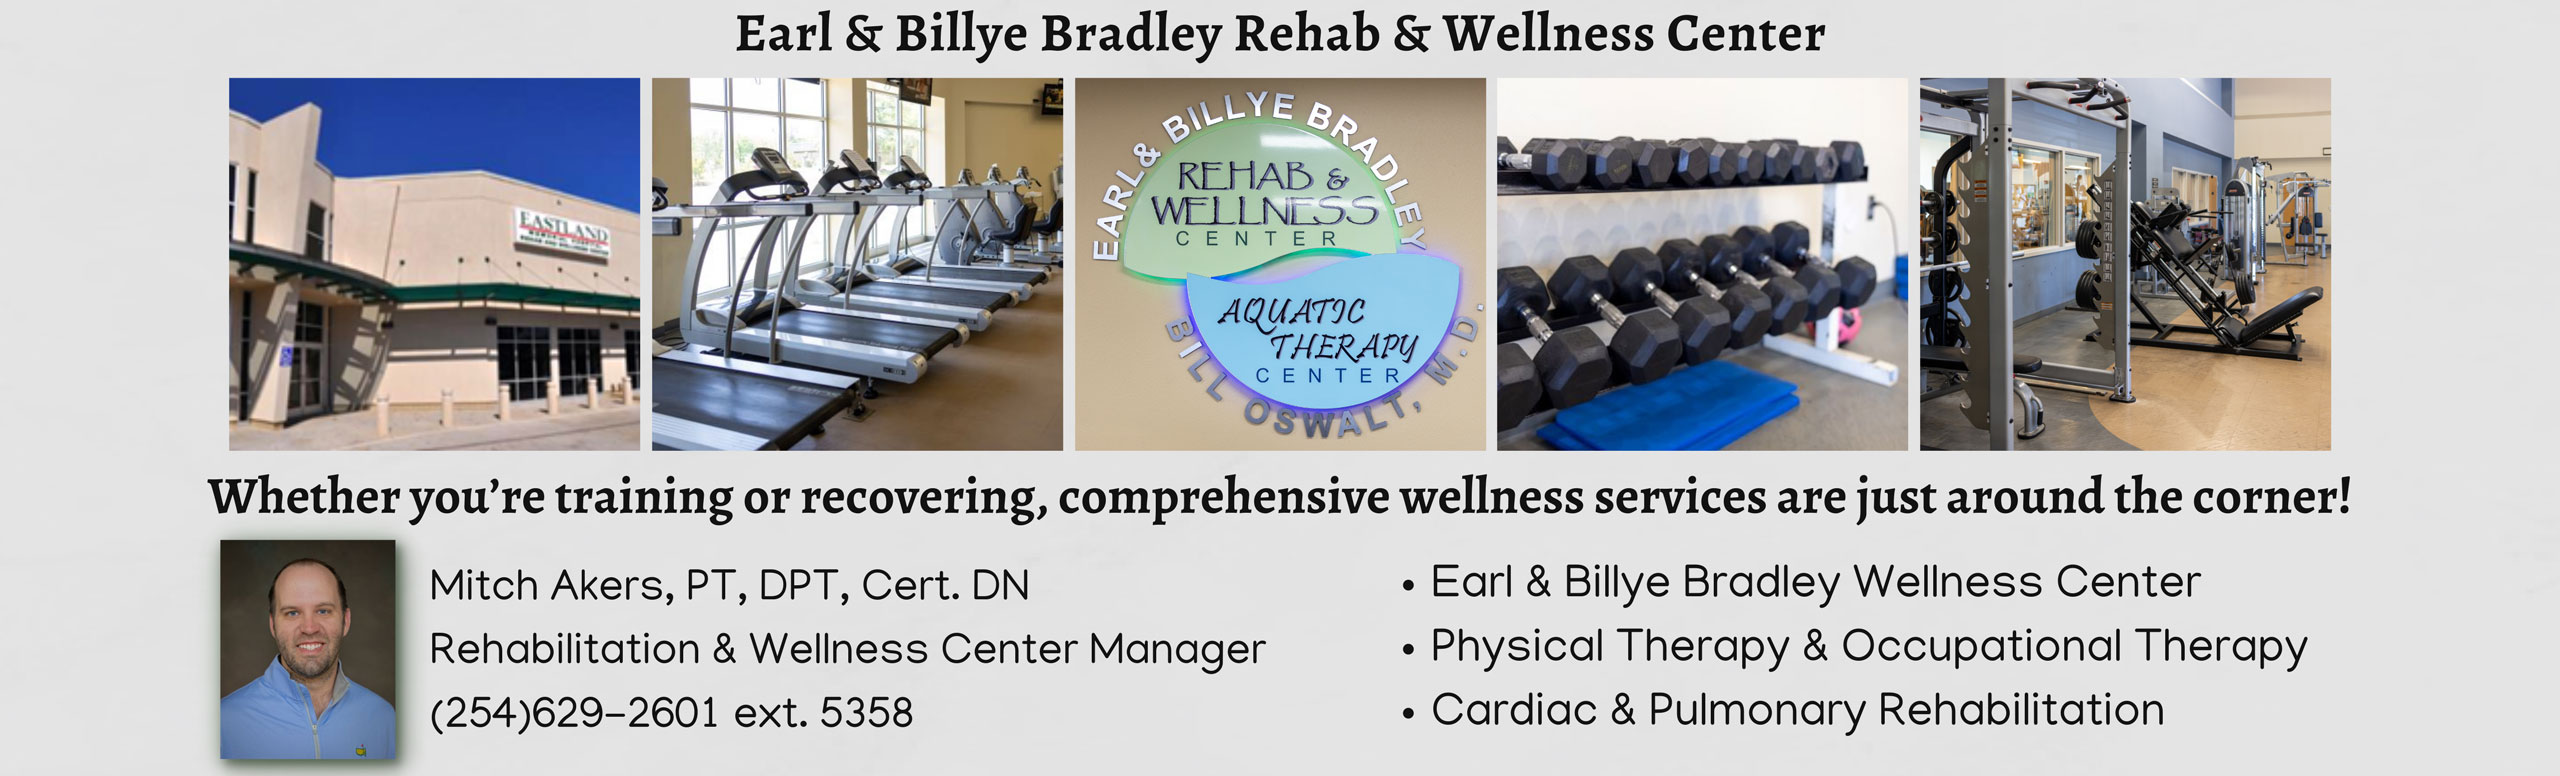 Earl & Billye Bradley Rehab & Wellness Center
Whether you're training or recovering, comphrehensive wellness services are just around the corner!

Mitch Akers, PT, DPT, Cert. DN
Rehabilitation & Wellness Center Manager
(254)629-2601 ext. 5358
-Earl & Billye Bradley Wellness Center
-Physical Therapy & Occupational Therapy 
-Cardiac & Pulmonary Rehabilitation